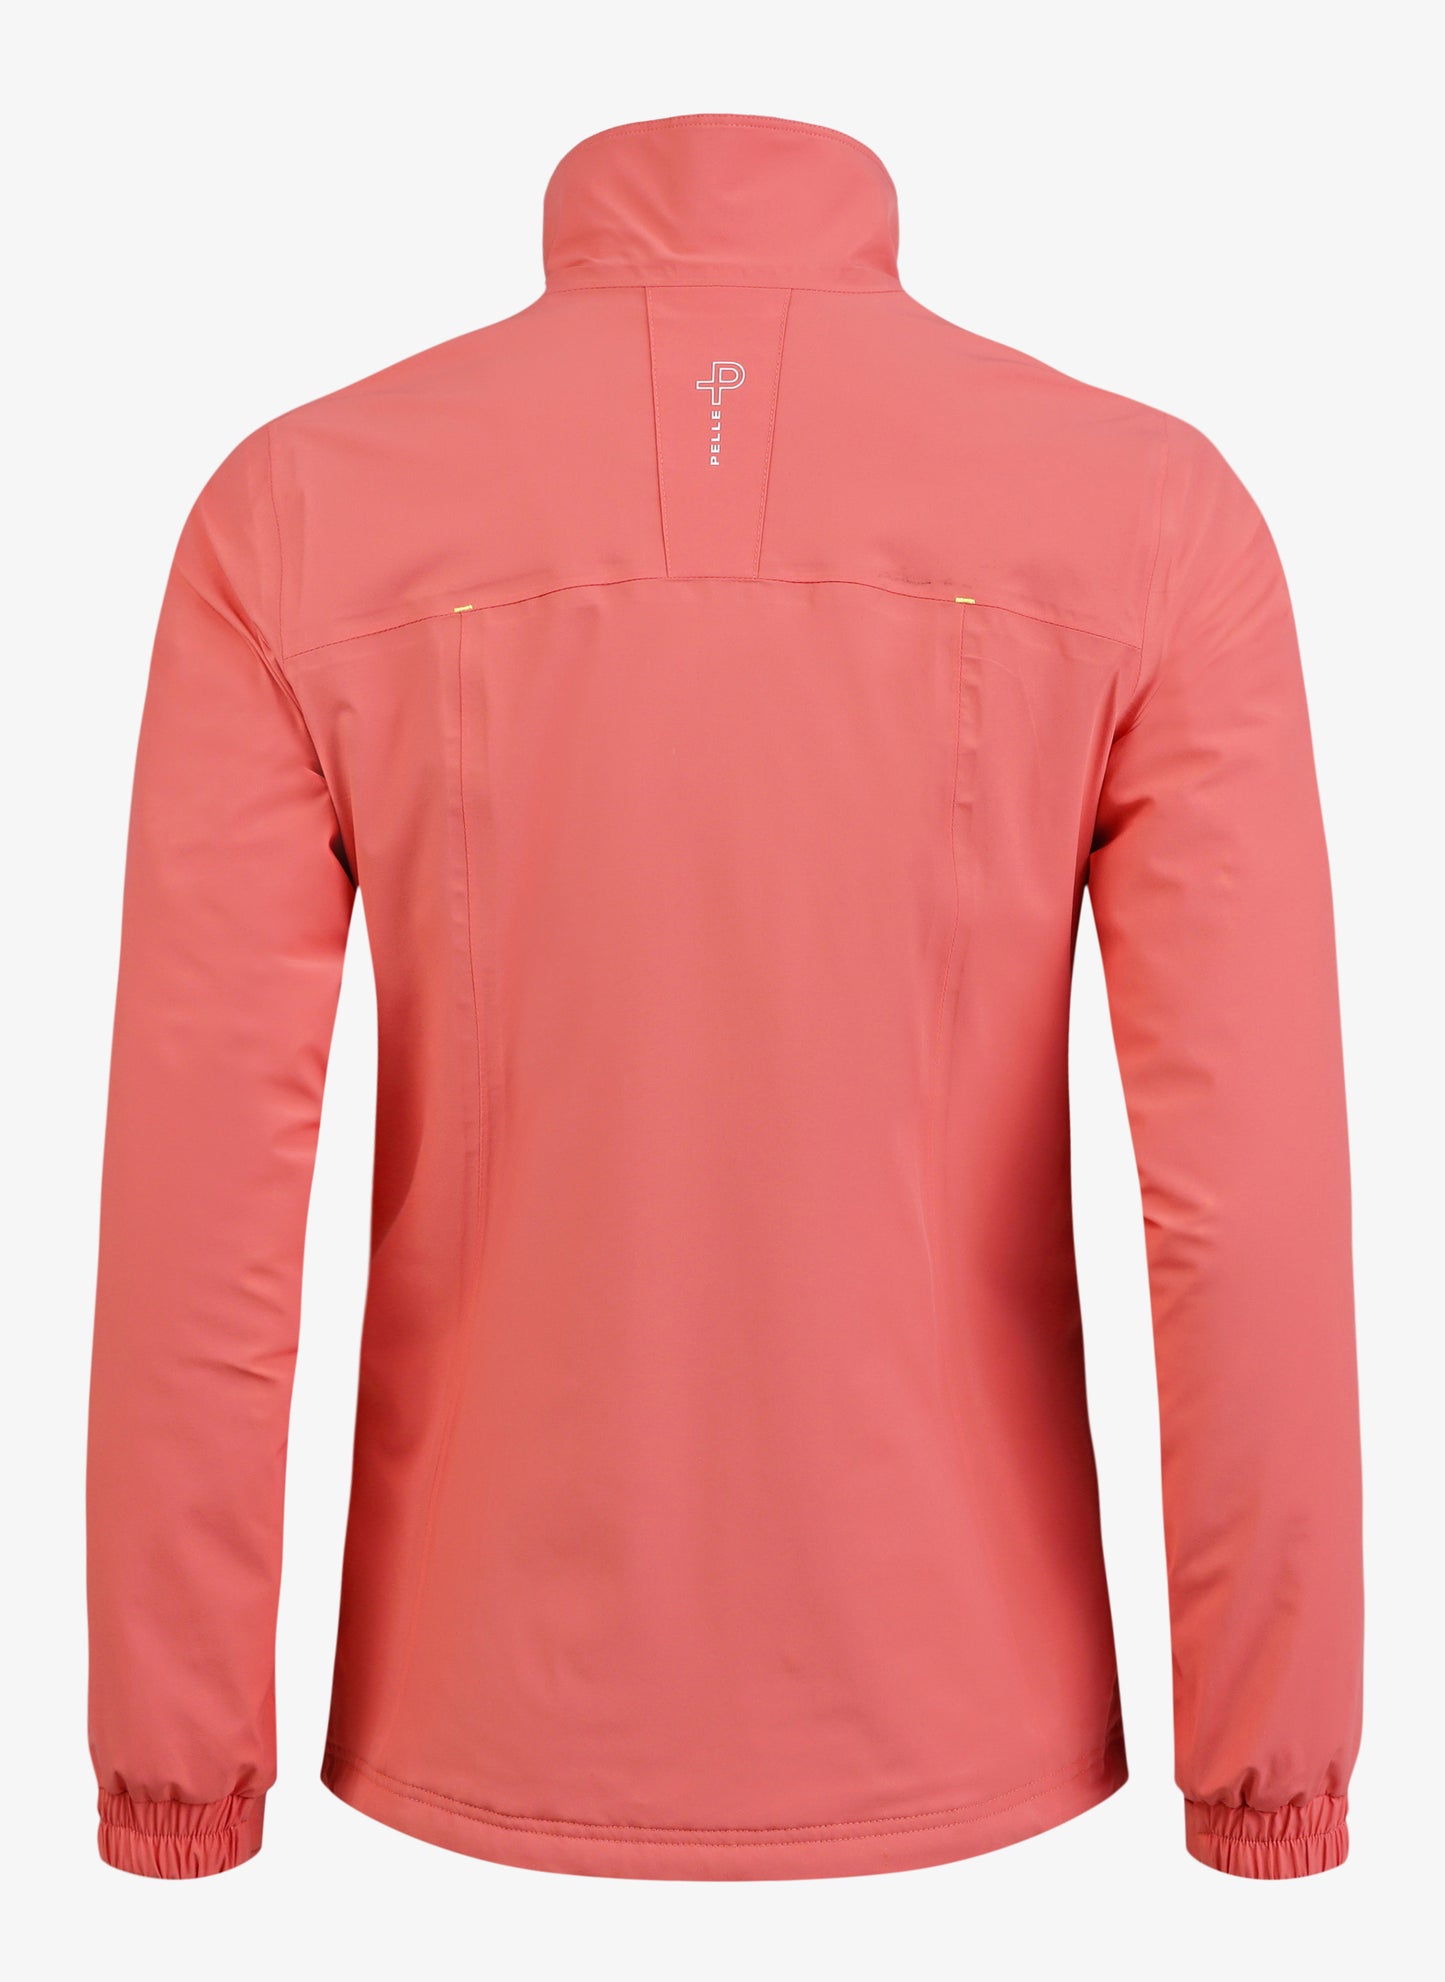 Pelle P Women's Crew Jacket - Coral Red